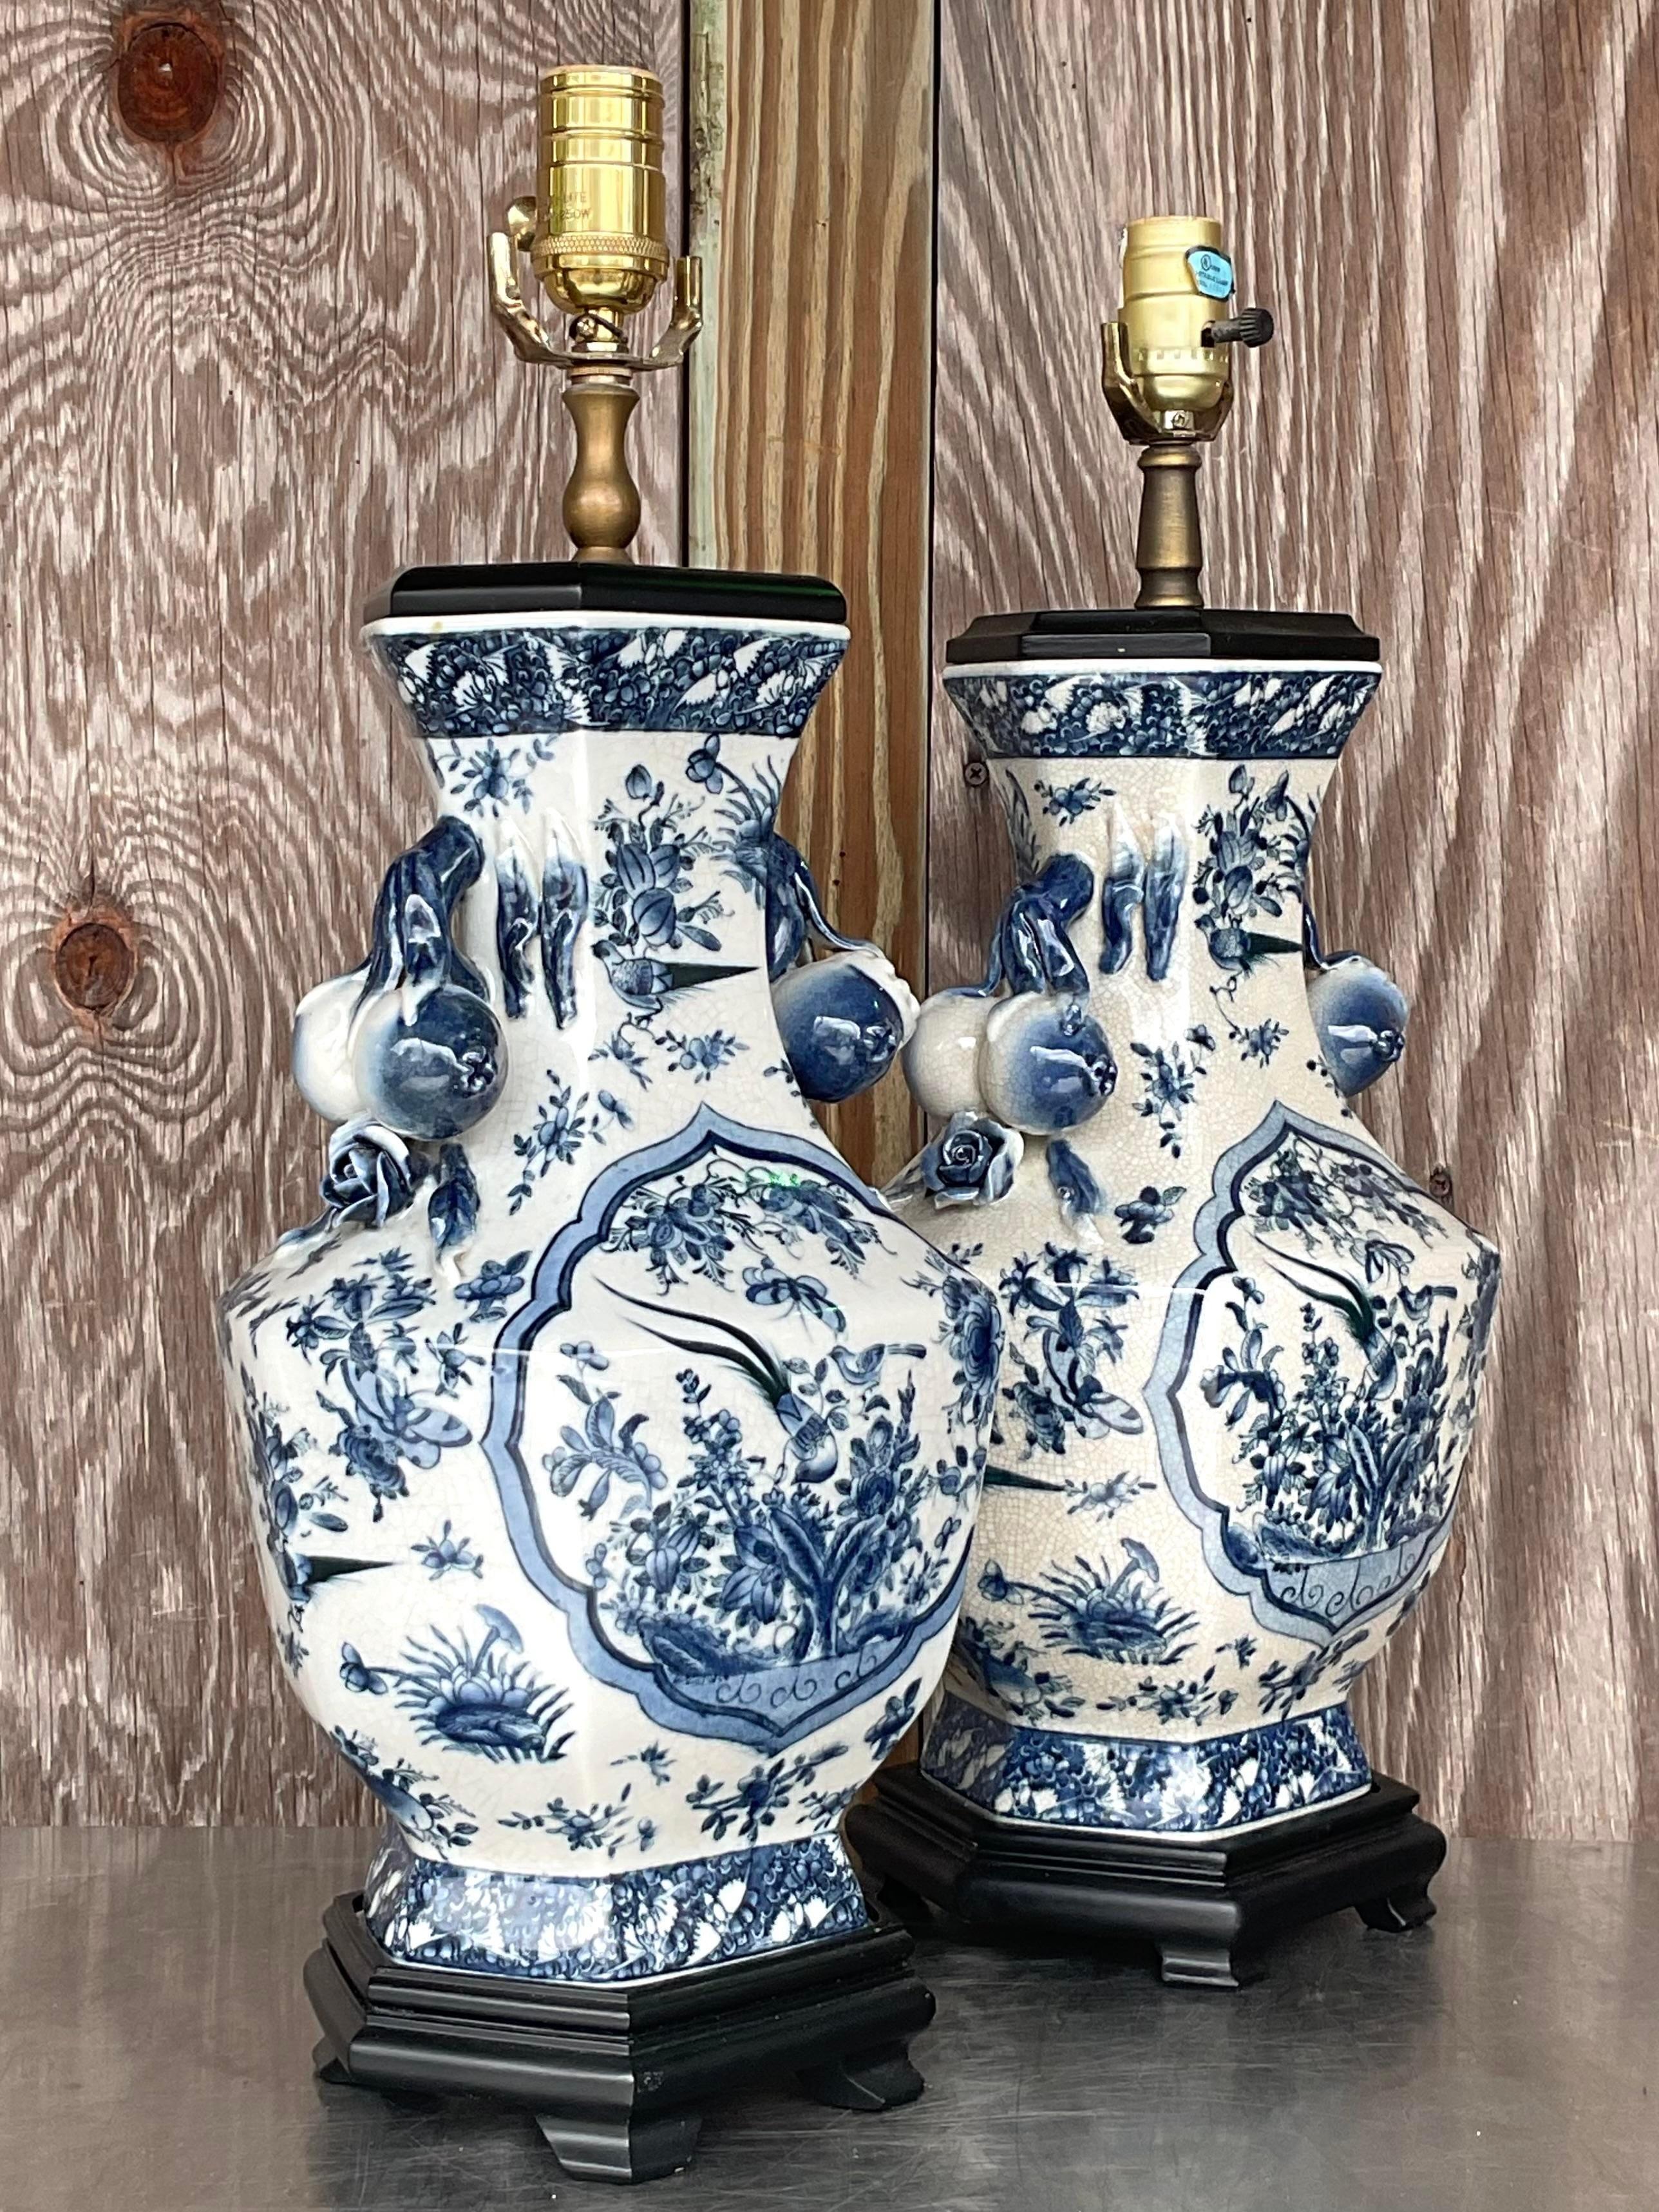 Illuminate with elegance using our Vintage Asian Chinoiserie Ceramic Lamps - A Pair. These exquisite lamps showcase traditional Chinoiserie design, blending Asian artistry with American sophistication. A perfect duo that adds a touch of timeless